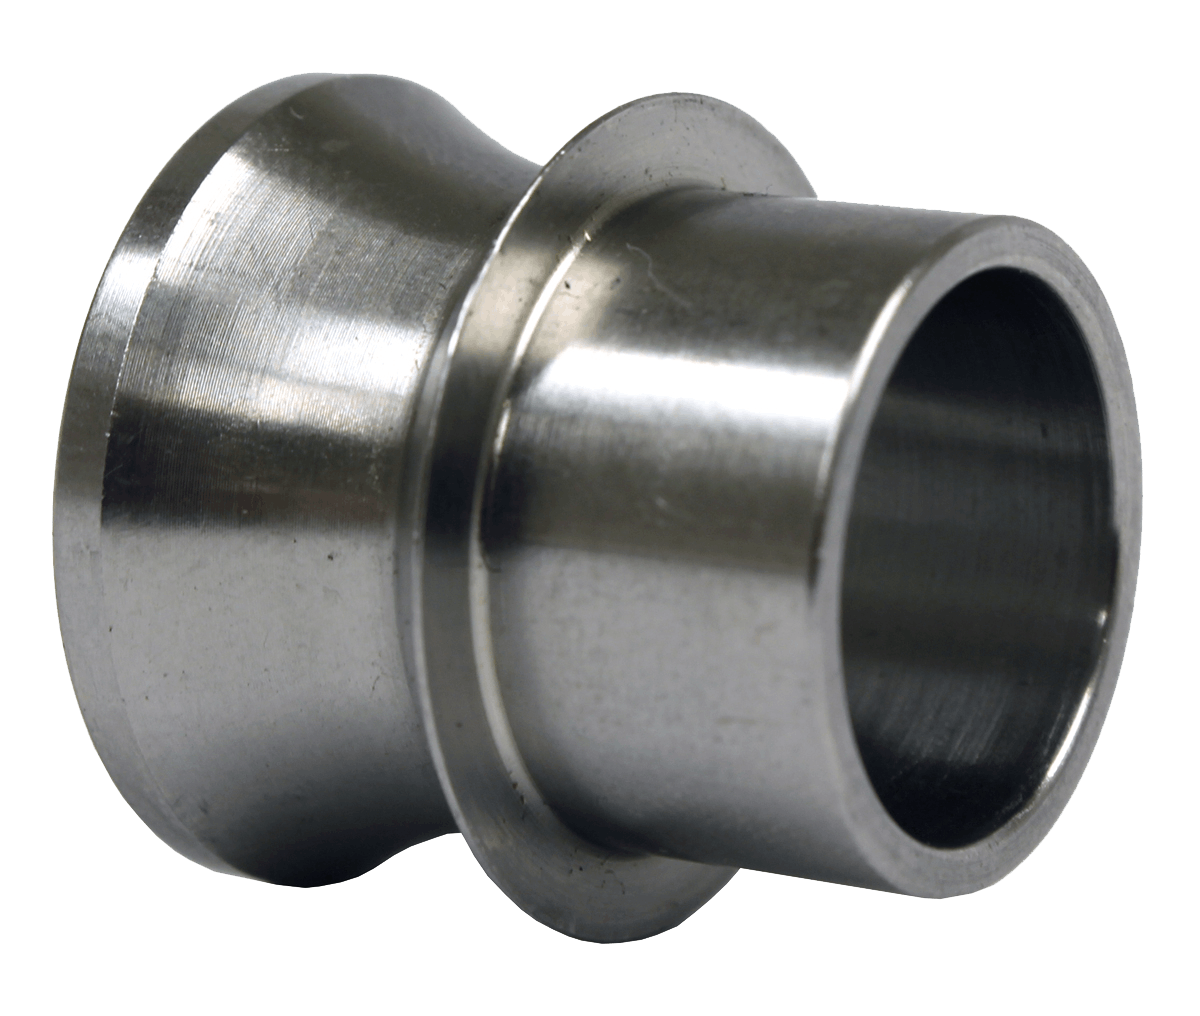 QA1 SN16-1213 High Misalignment Spacer, 1 inch Od Ss, .75 inch X 2.625 inch Total Width